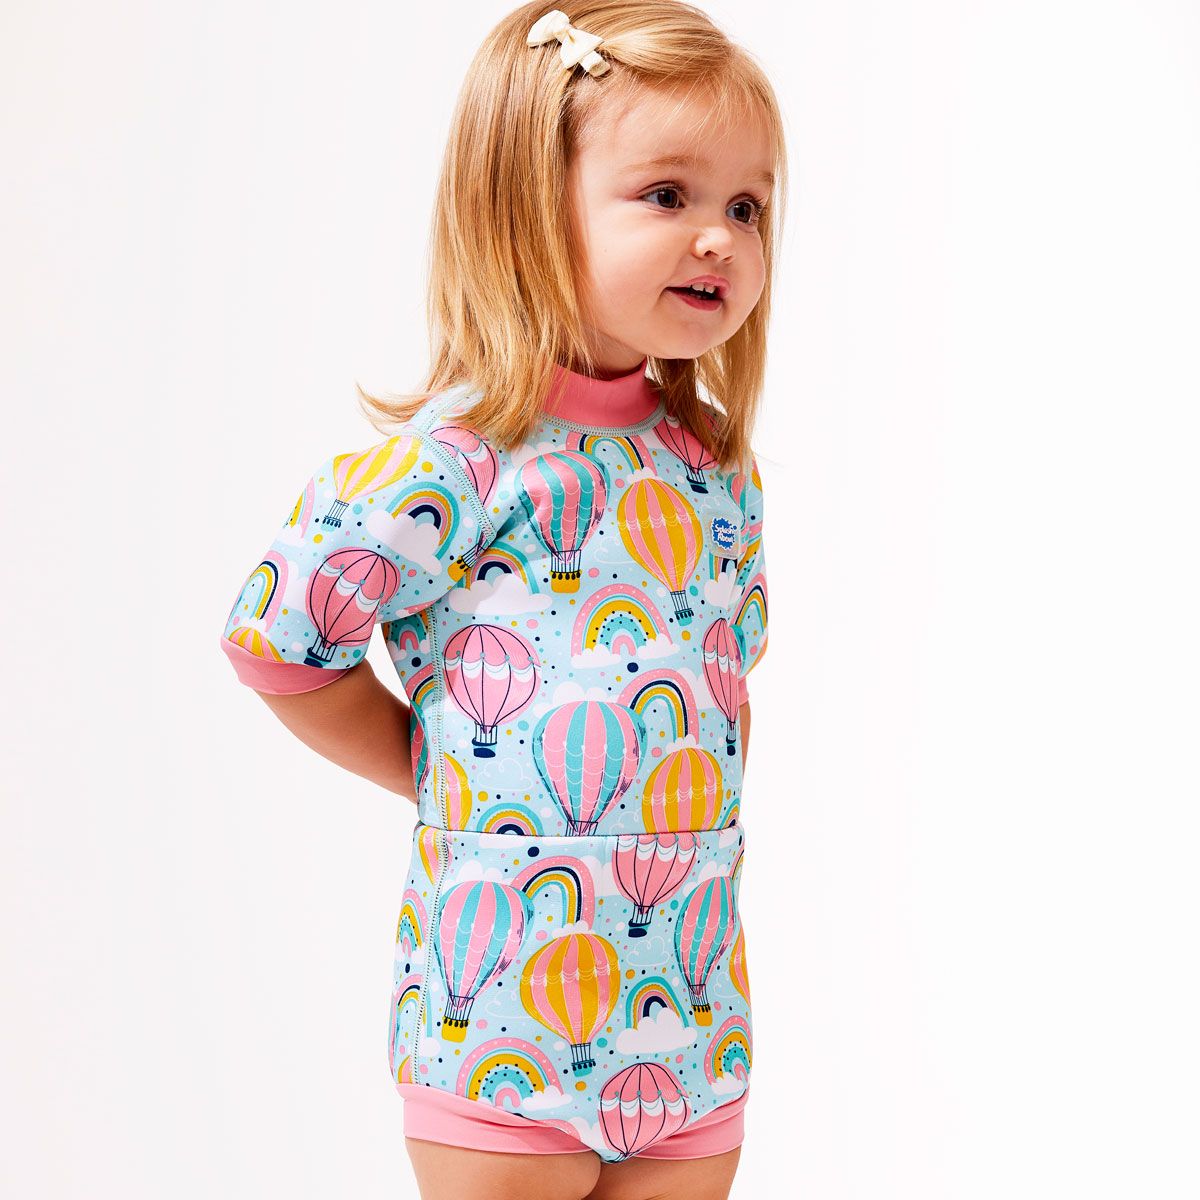 Lifestyle image of toddler wearing a cute wetsuit with built in swim nappy in baby blue with pink trims and hot air balloons themed print, including rainbows and clouds. 